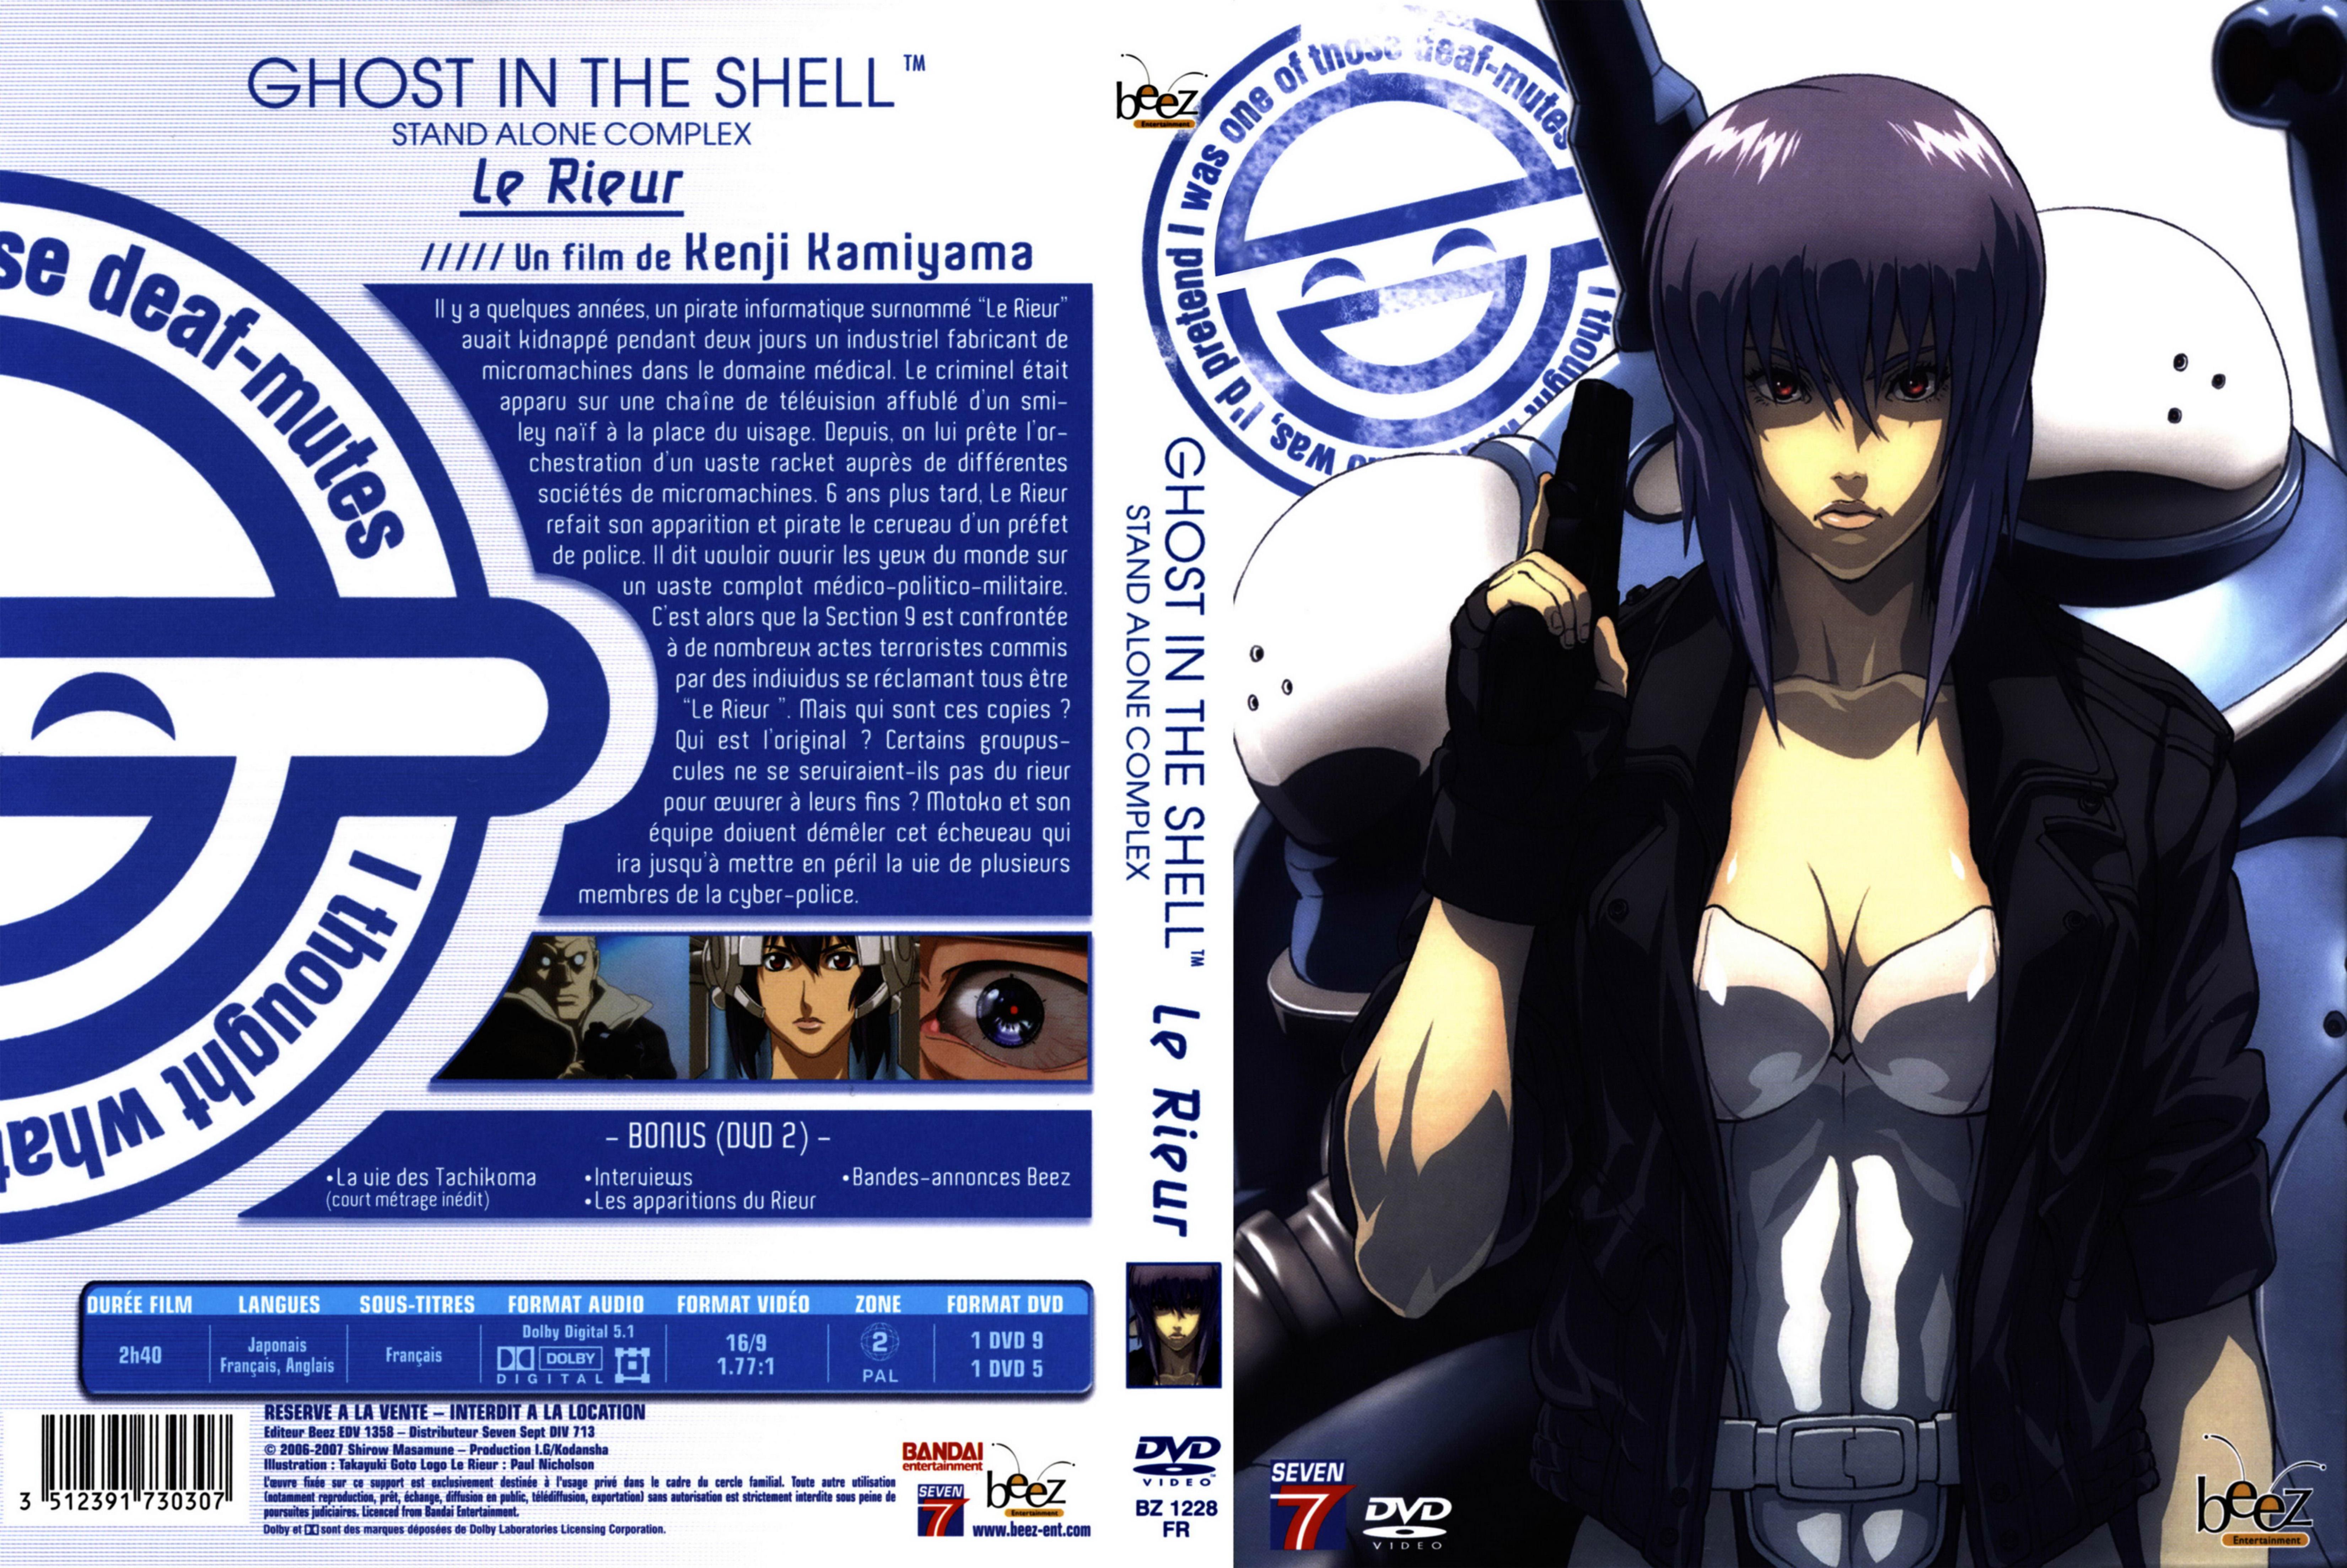 Jaquette DVD Ghost in the shell - stand alone complex Le Rieur